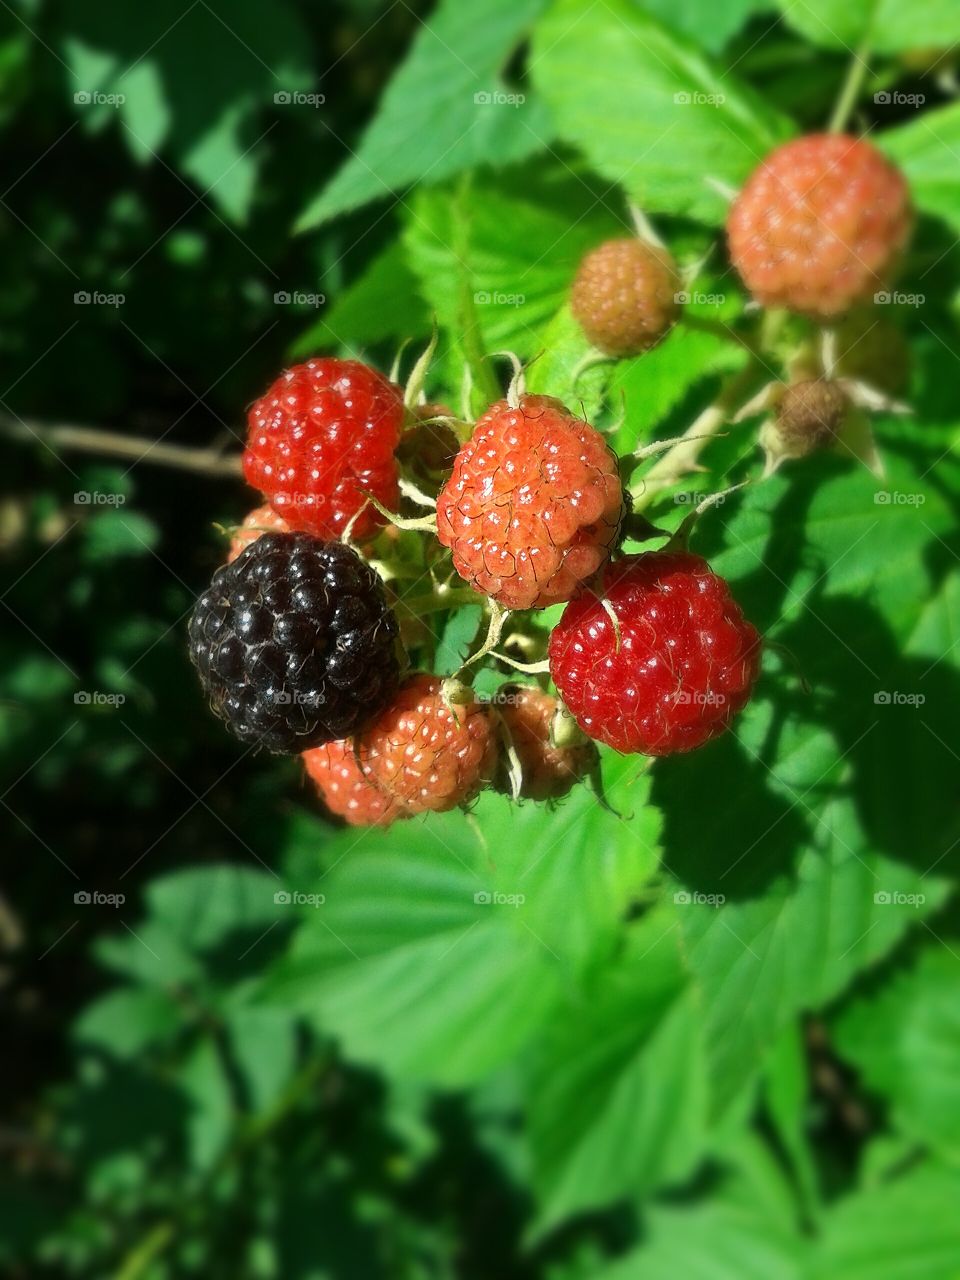 Still ripening in the early sun.. Nothing compares to fresh raspberries ready for sampling.